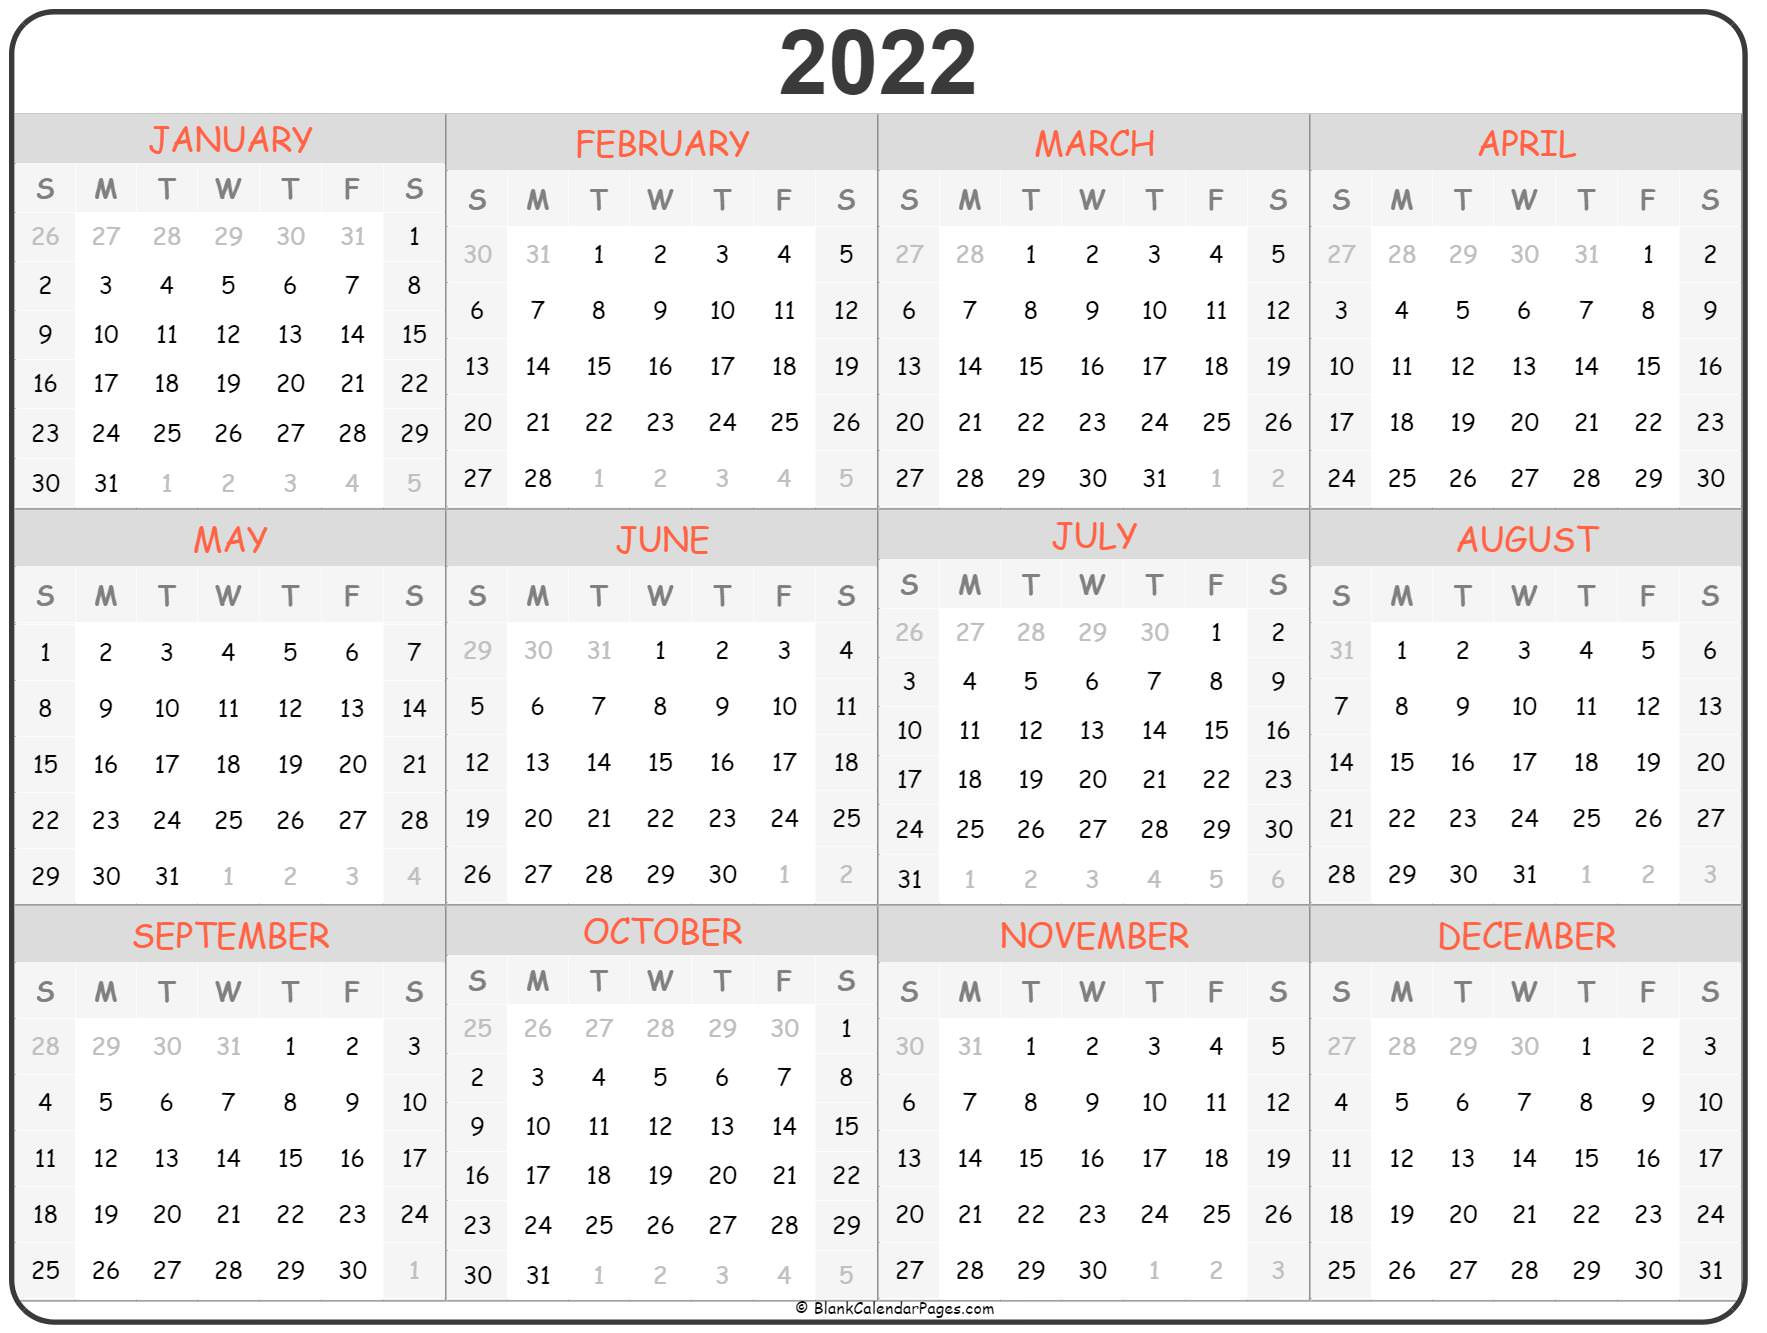 3 Year Calendar 2021 To 2022 Printable | Free Letter Templates-Two Year Calendar 2021 And 2022 Printable